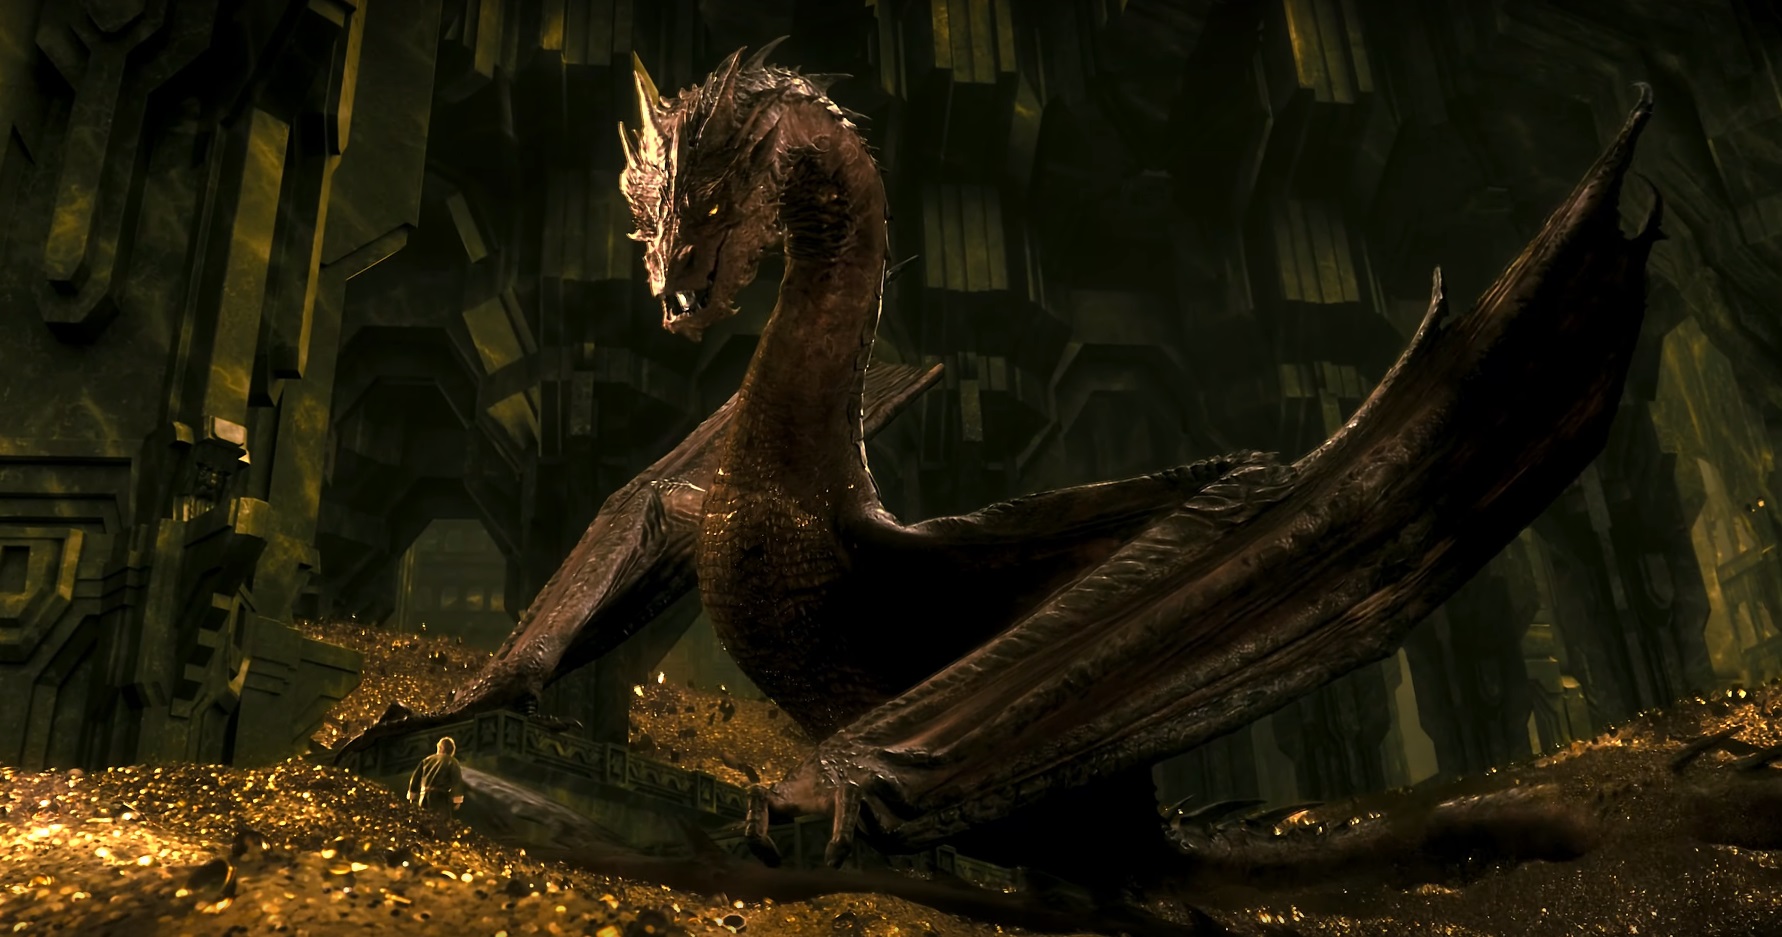 Smaug The Dragon From The Hobbit Trilogy Is Real!